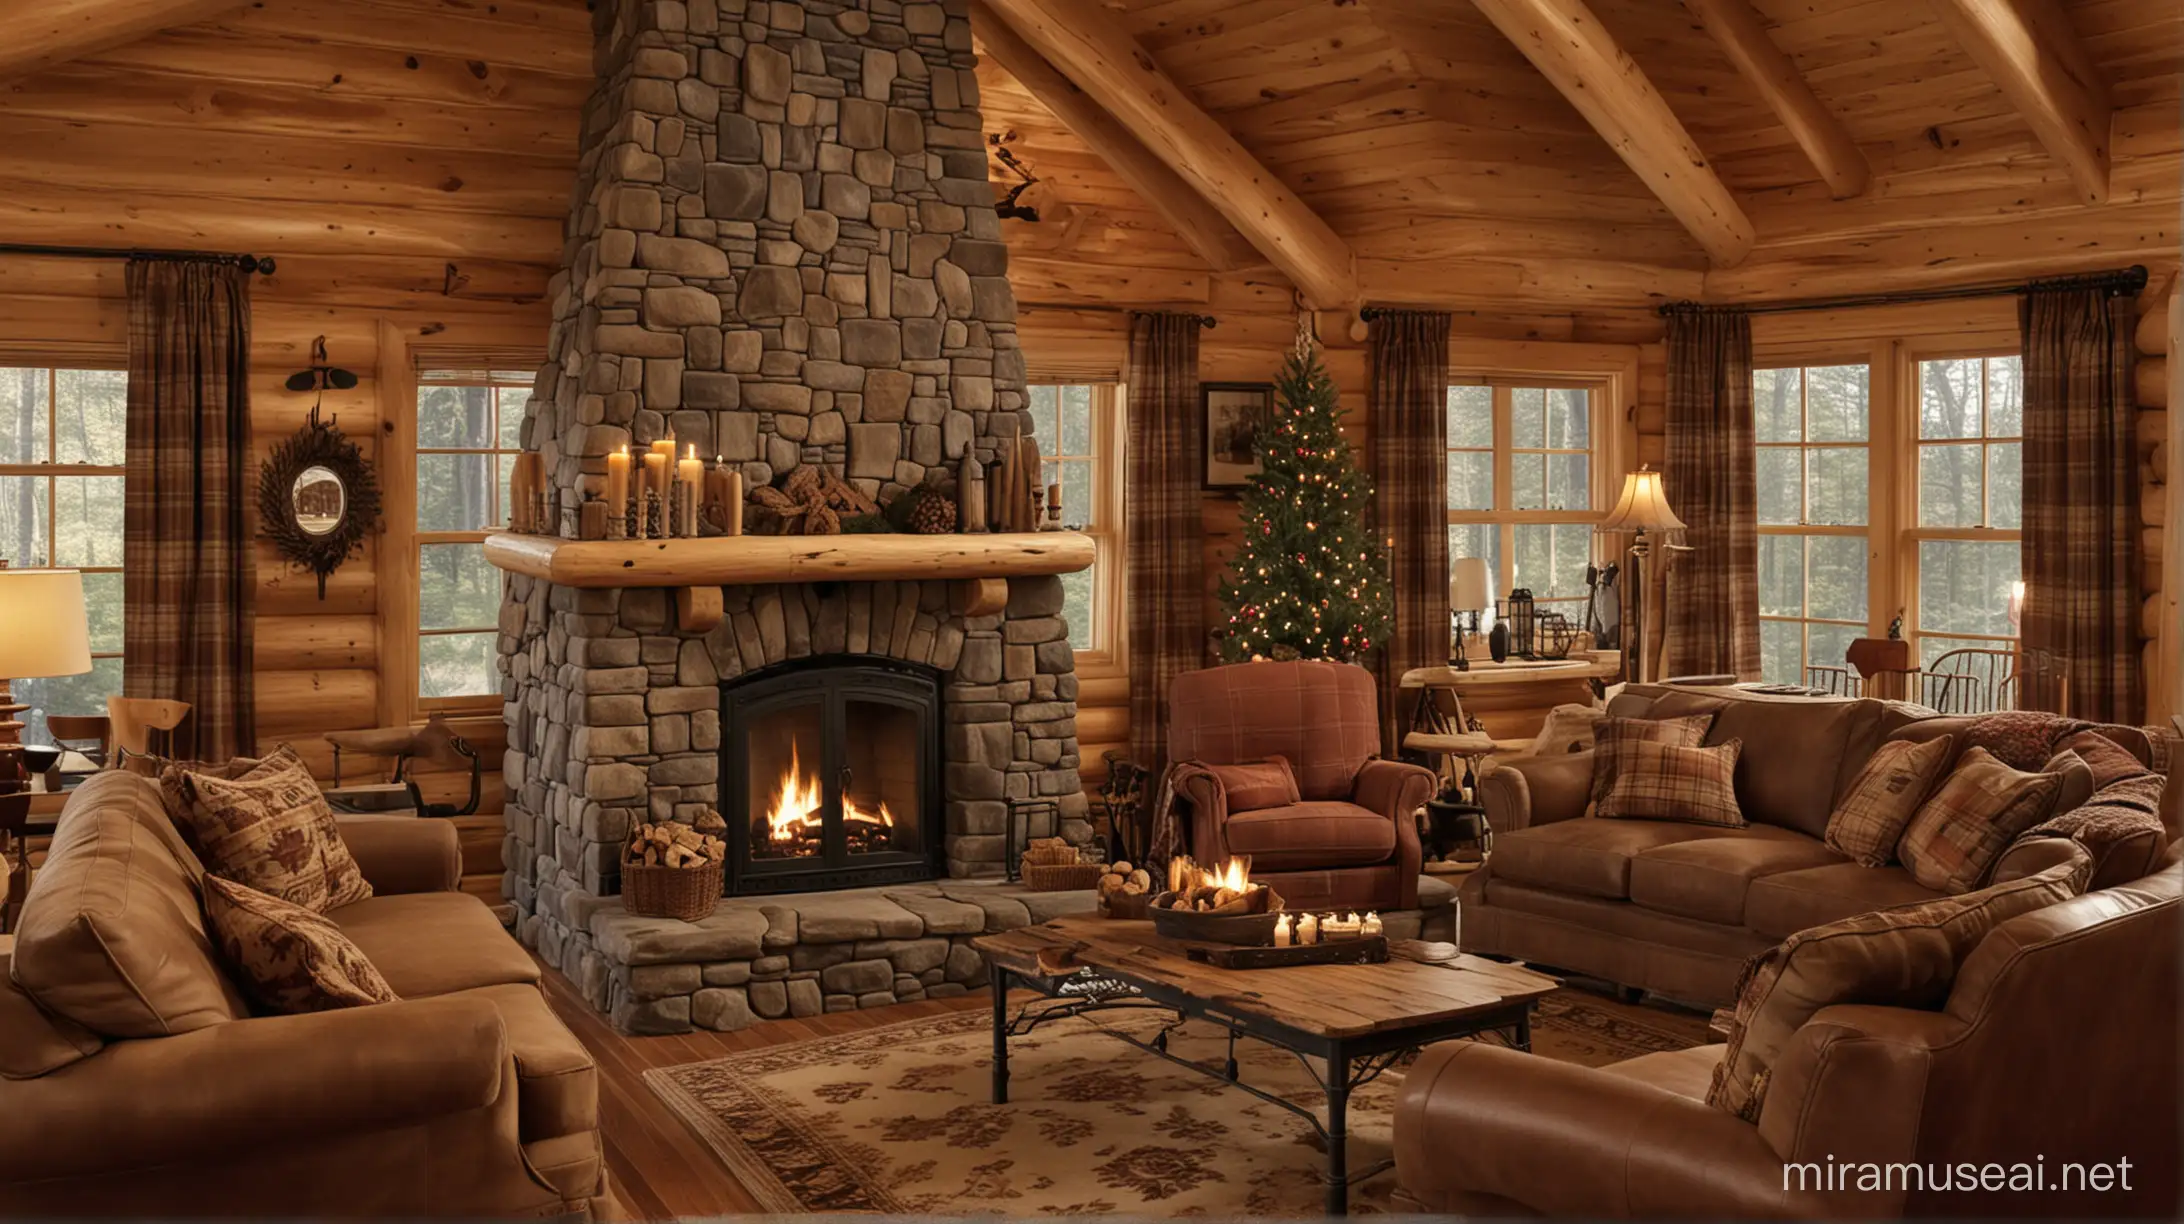 Cozy Cabin Living Room Interior with Fireplace